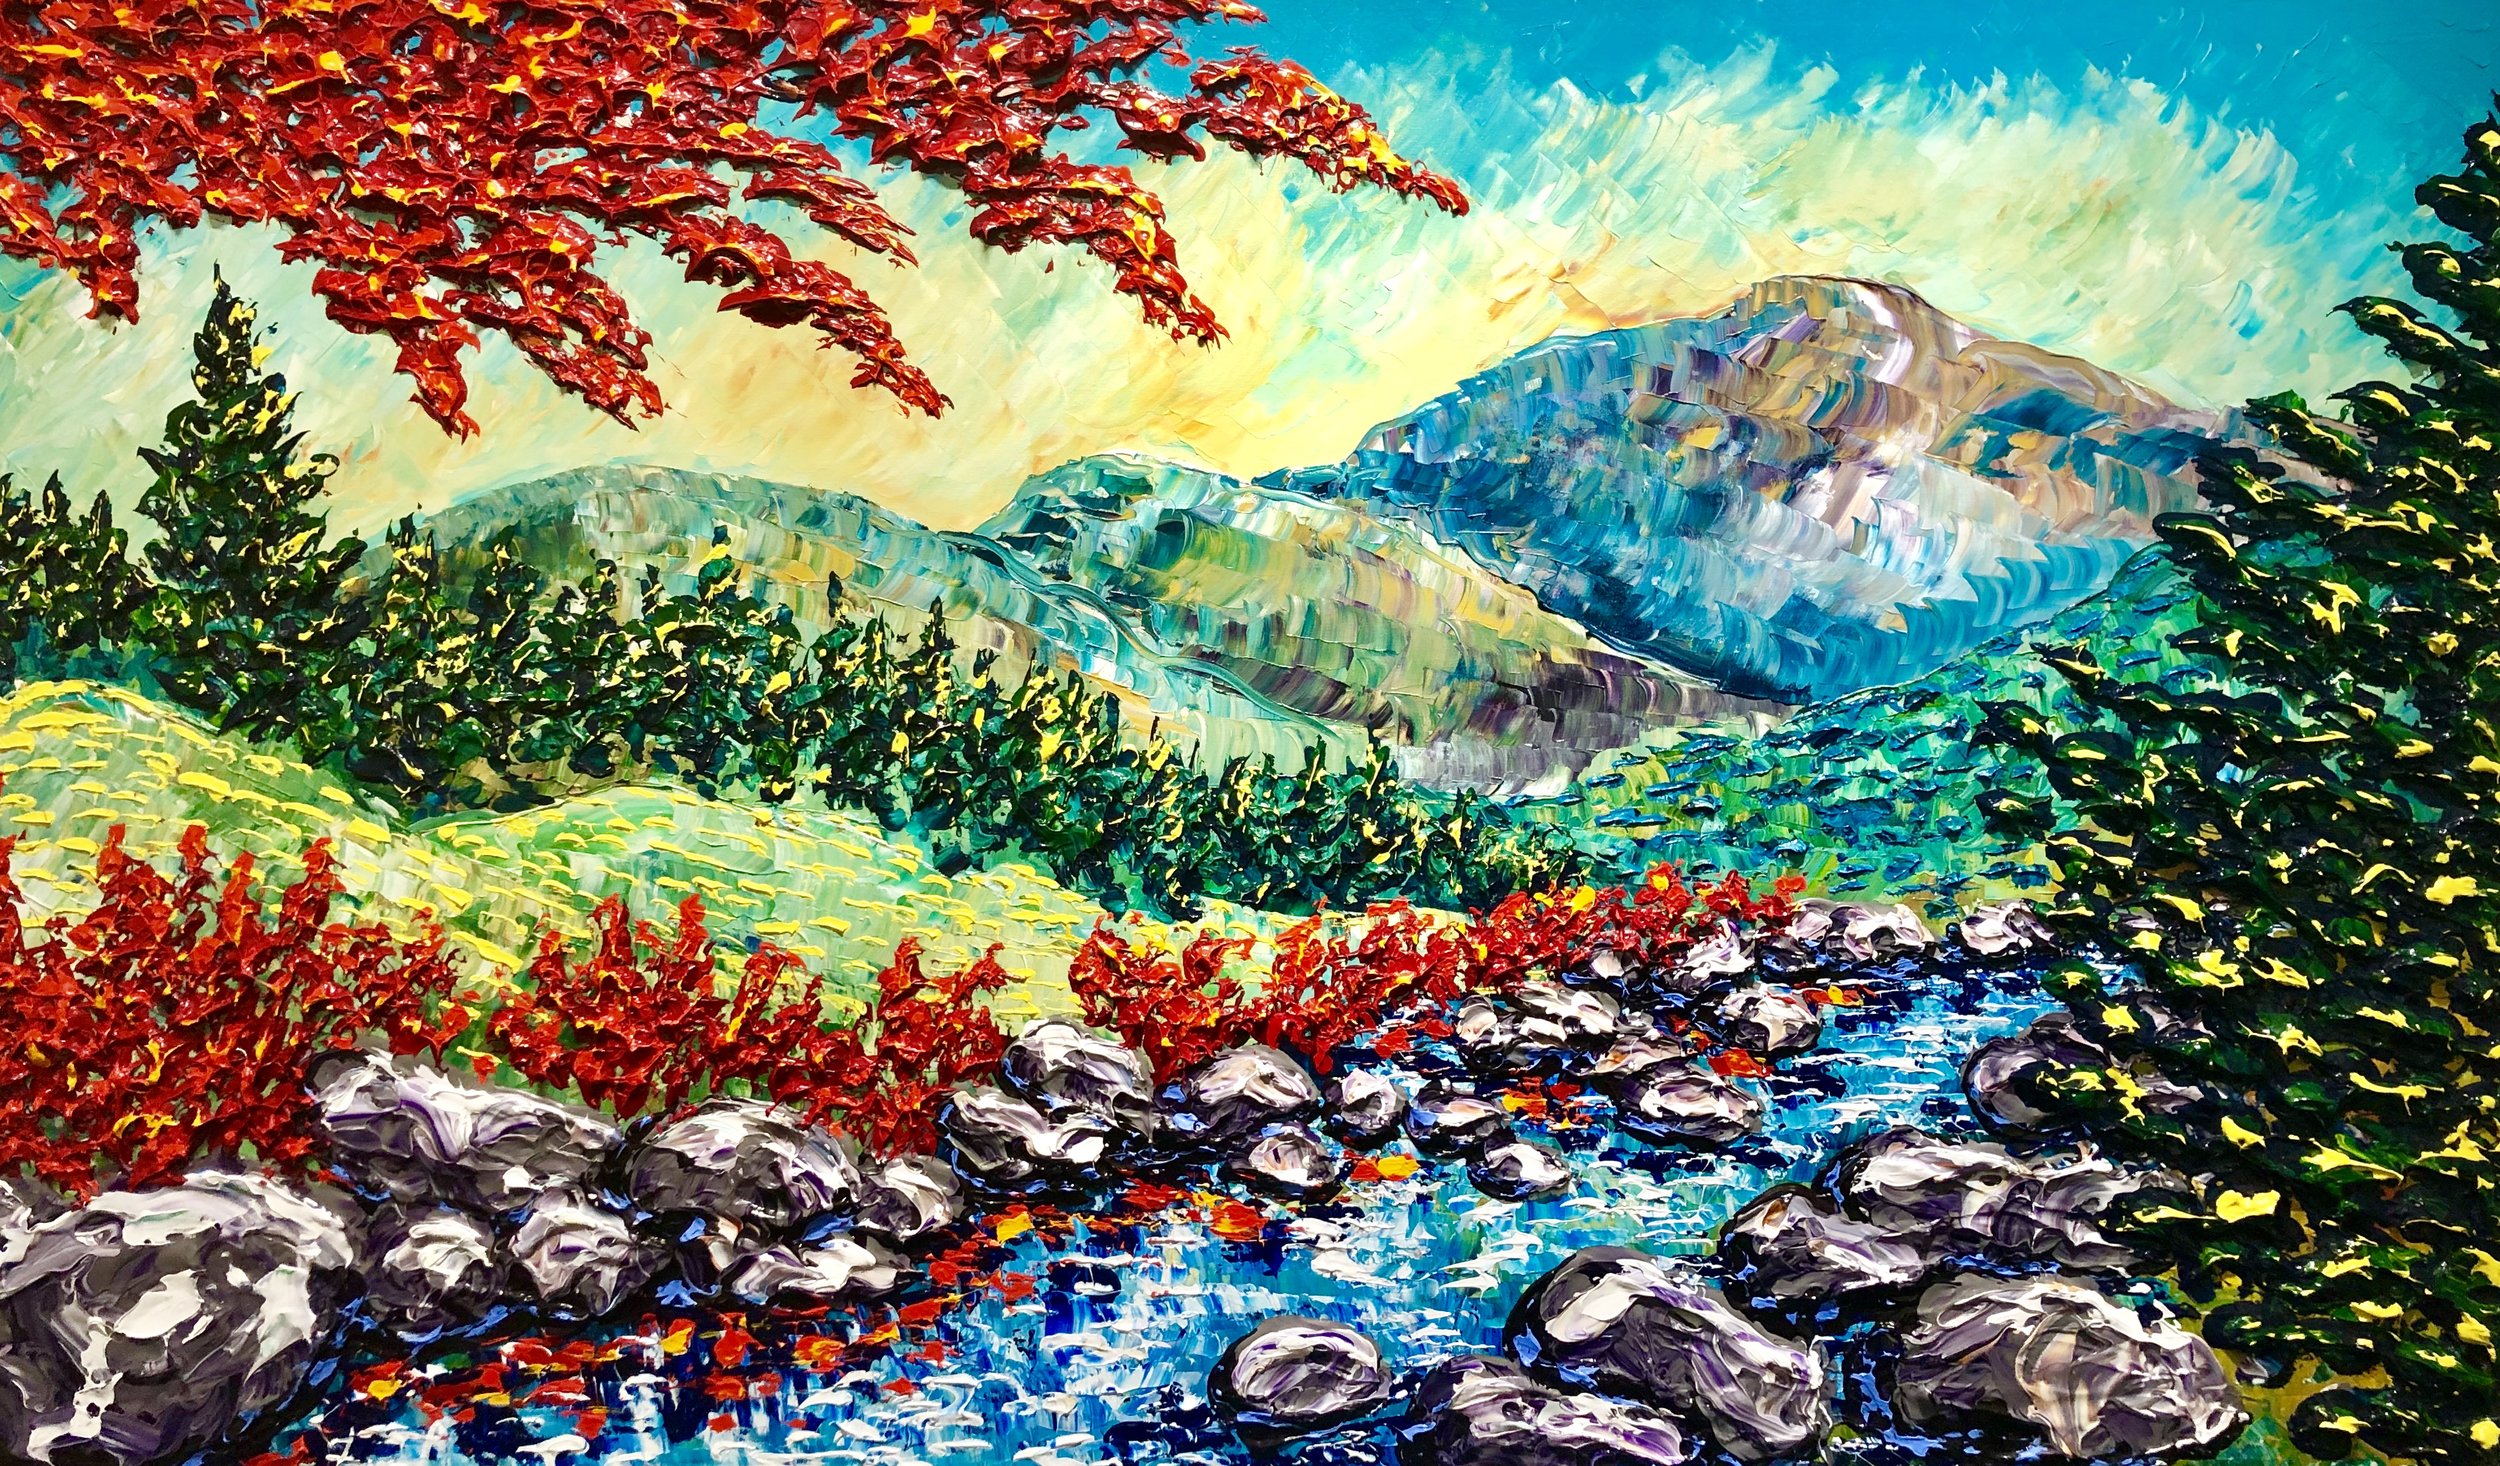 Dupuy ""Reflective waters of early Autumn" 36x60